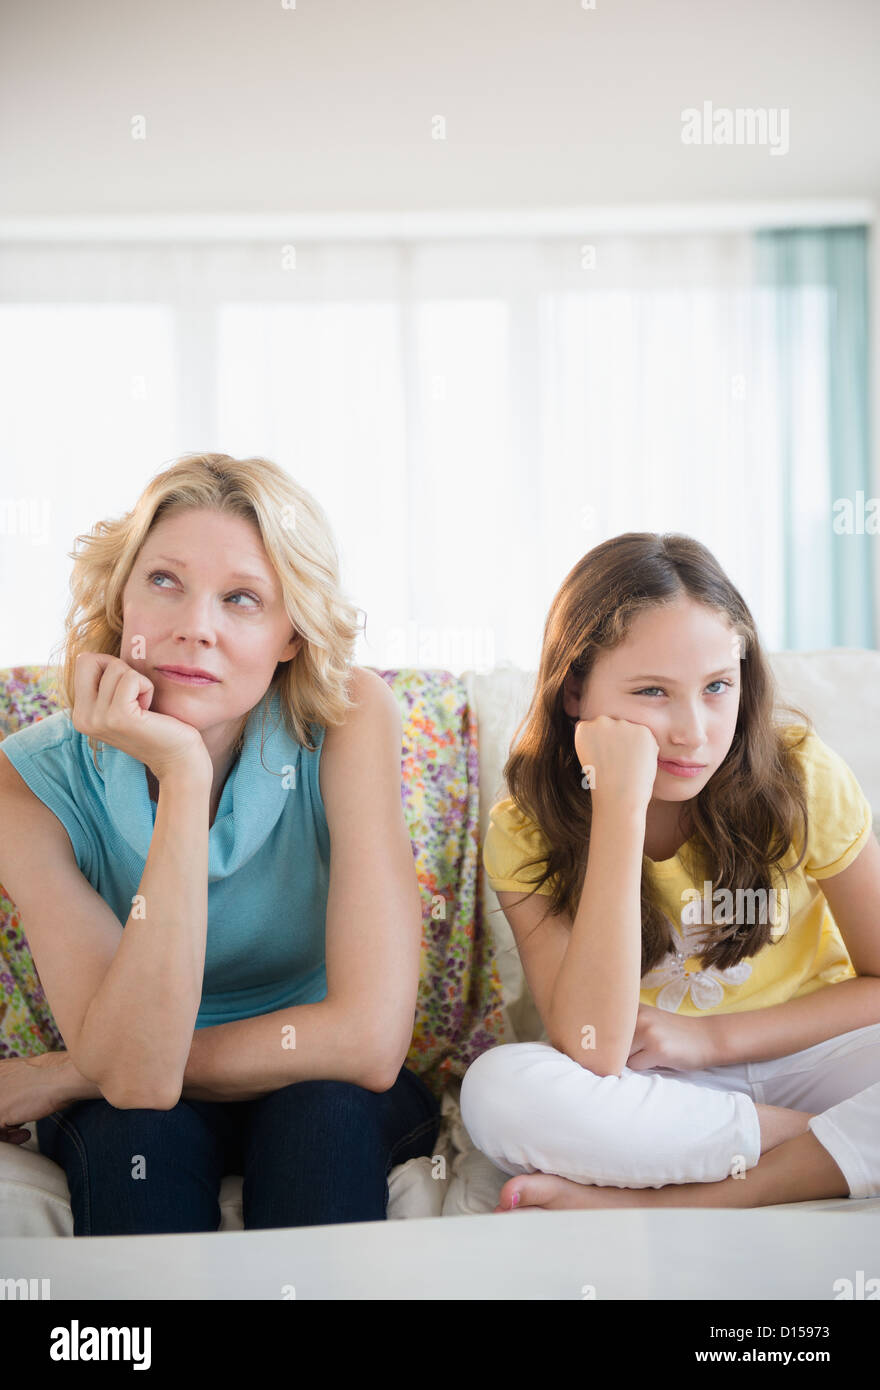 USA, New Jersey, Jersey City, Mother and daughter (8-9 years) looking upset Stock Photo